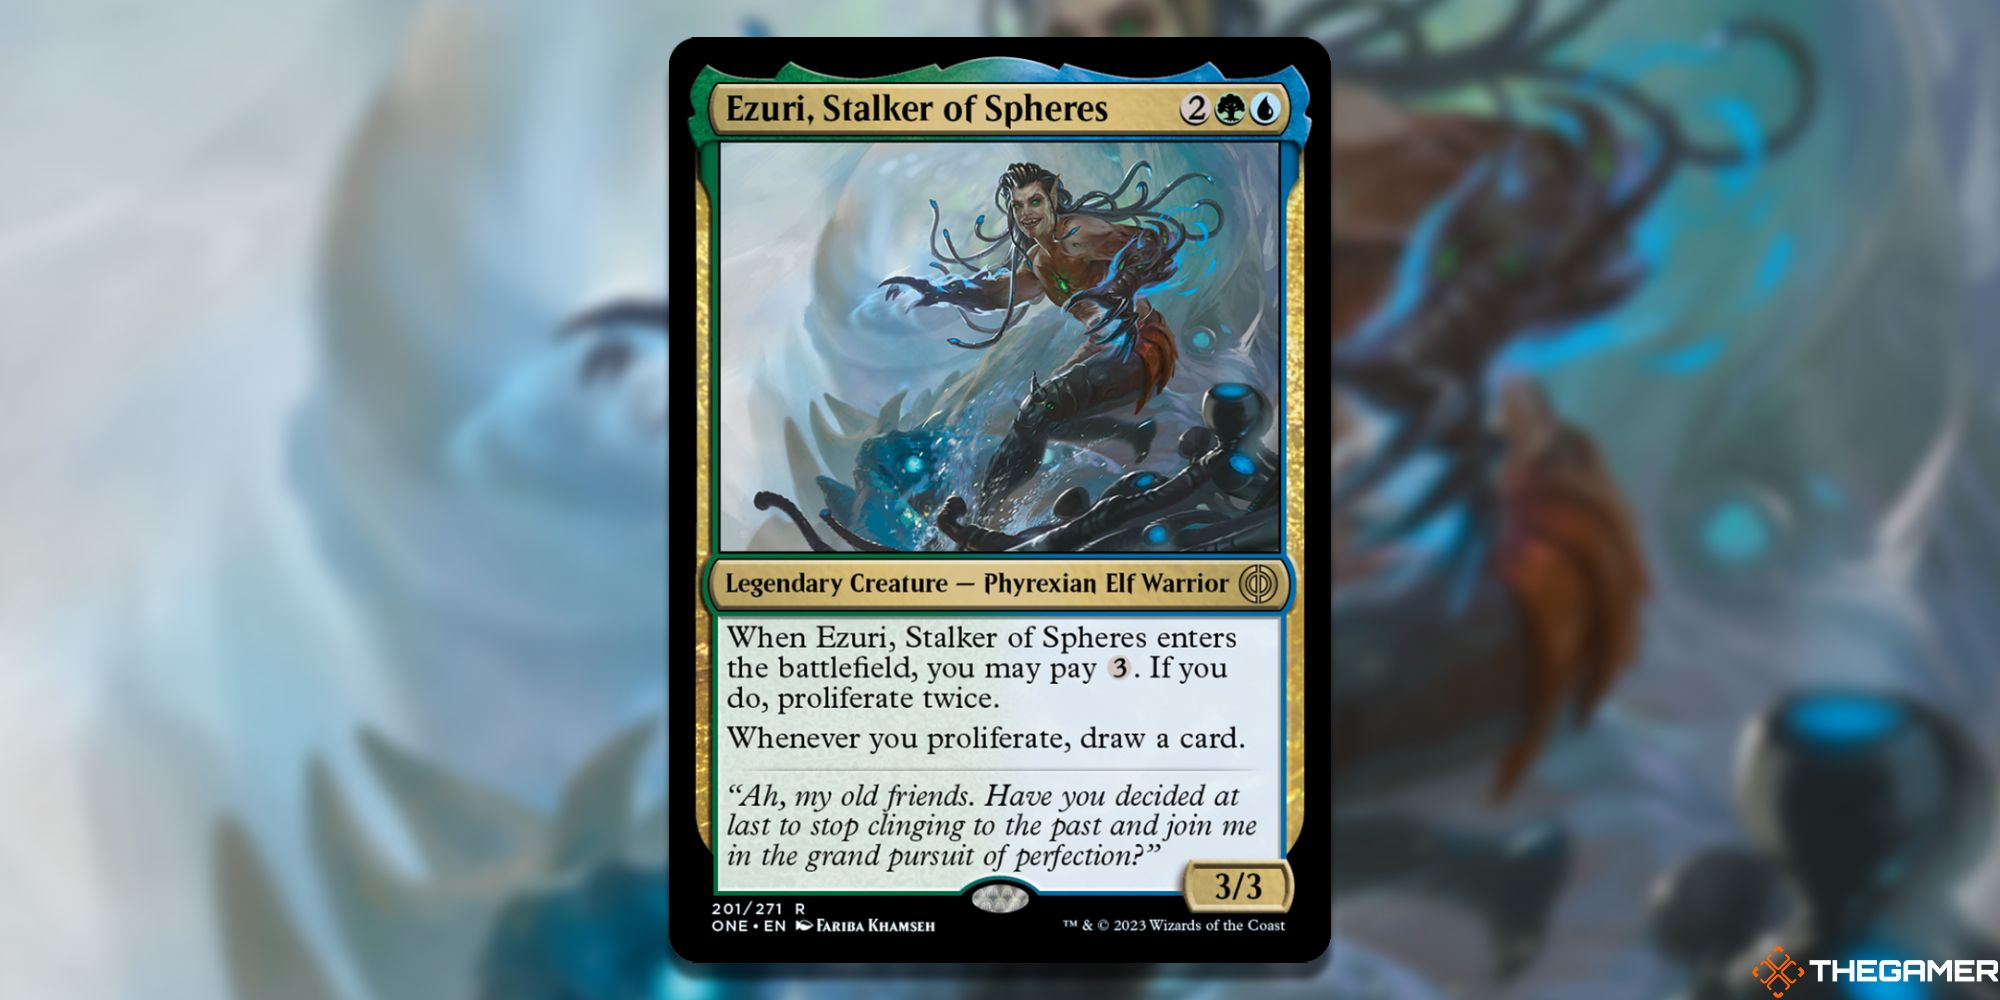 Image of the Ezuri Stalker of Spheres card in Magic: The Gathering, with art by Fariba Khamseh